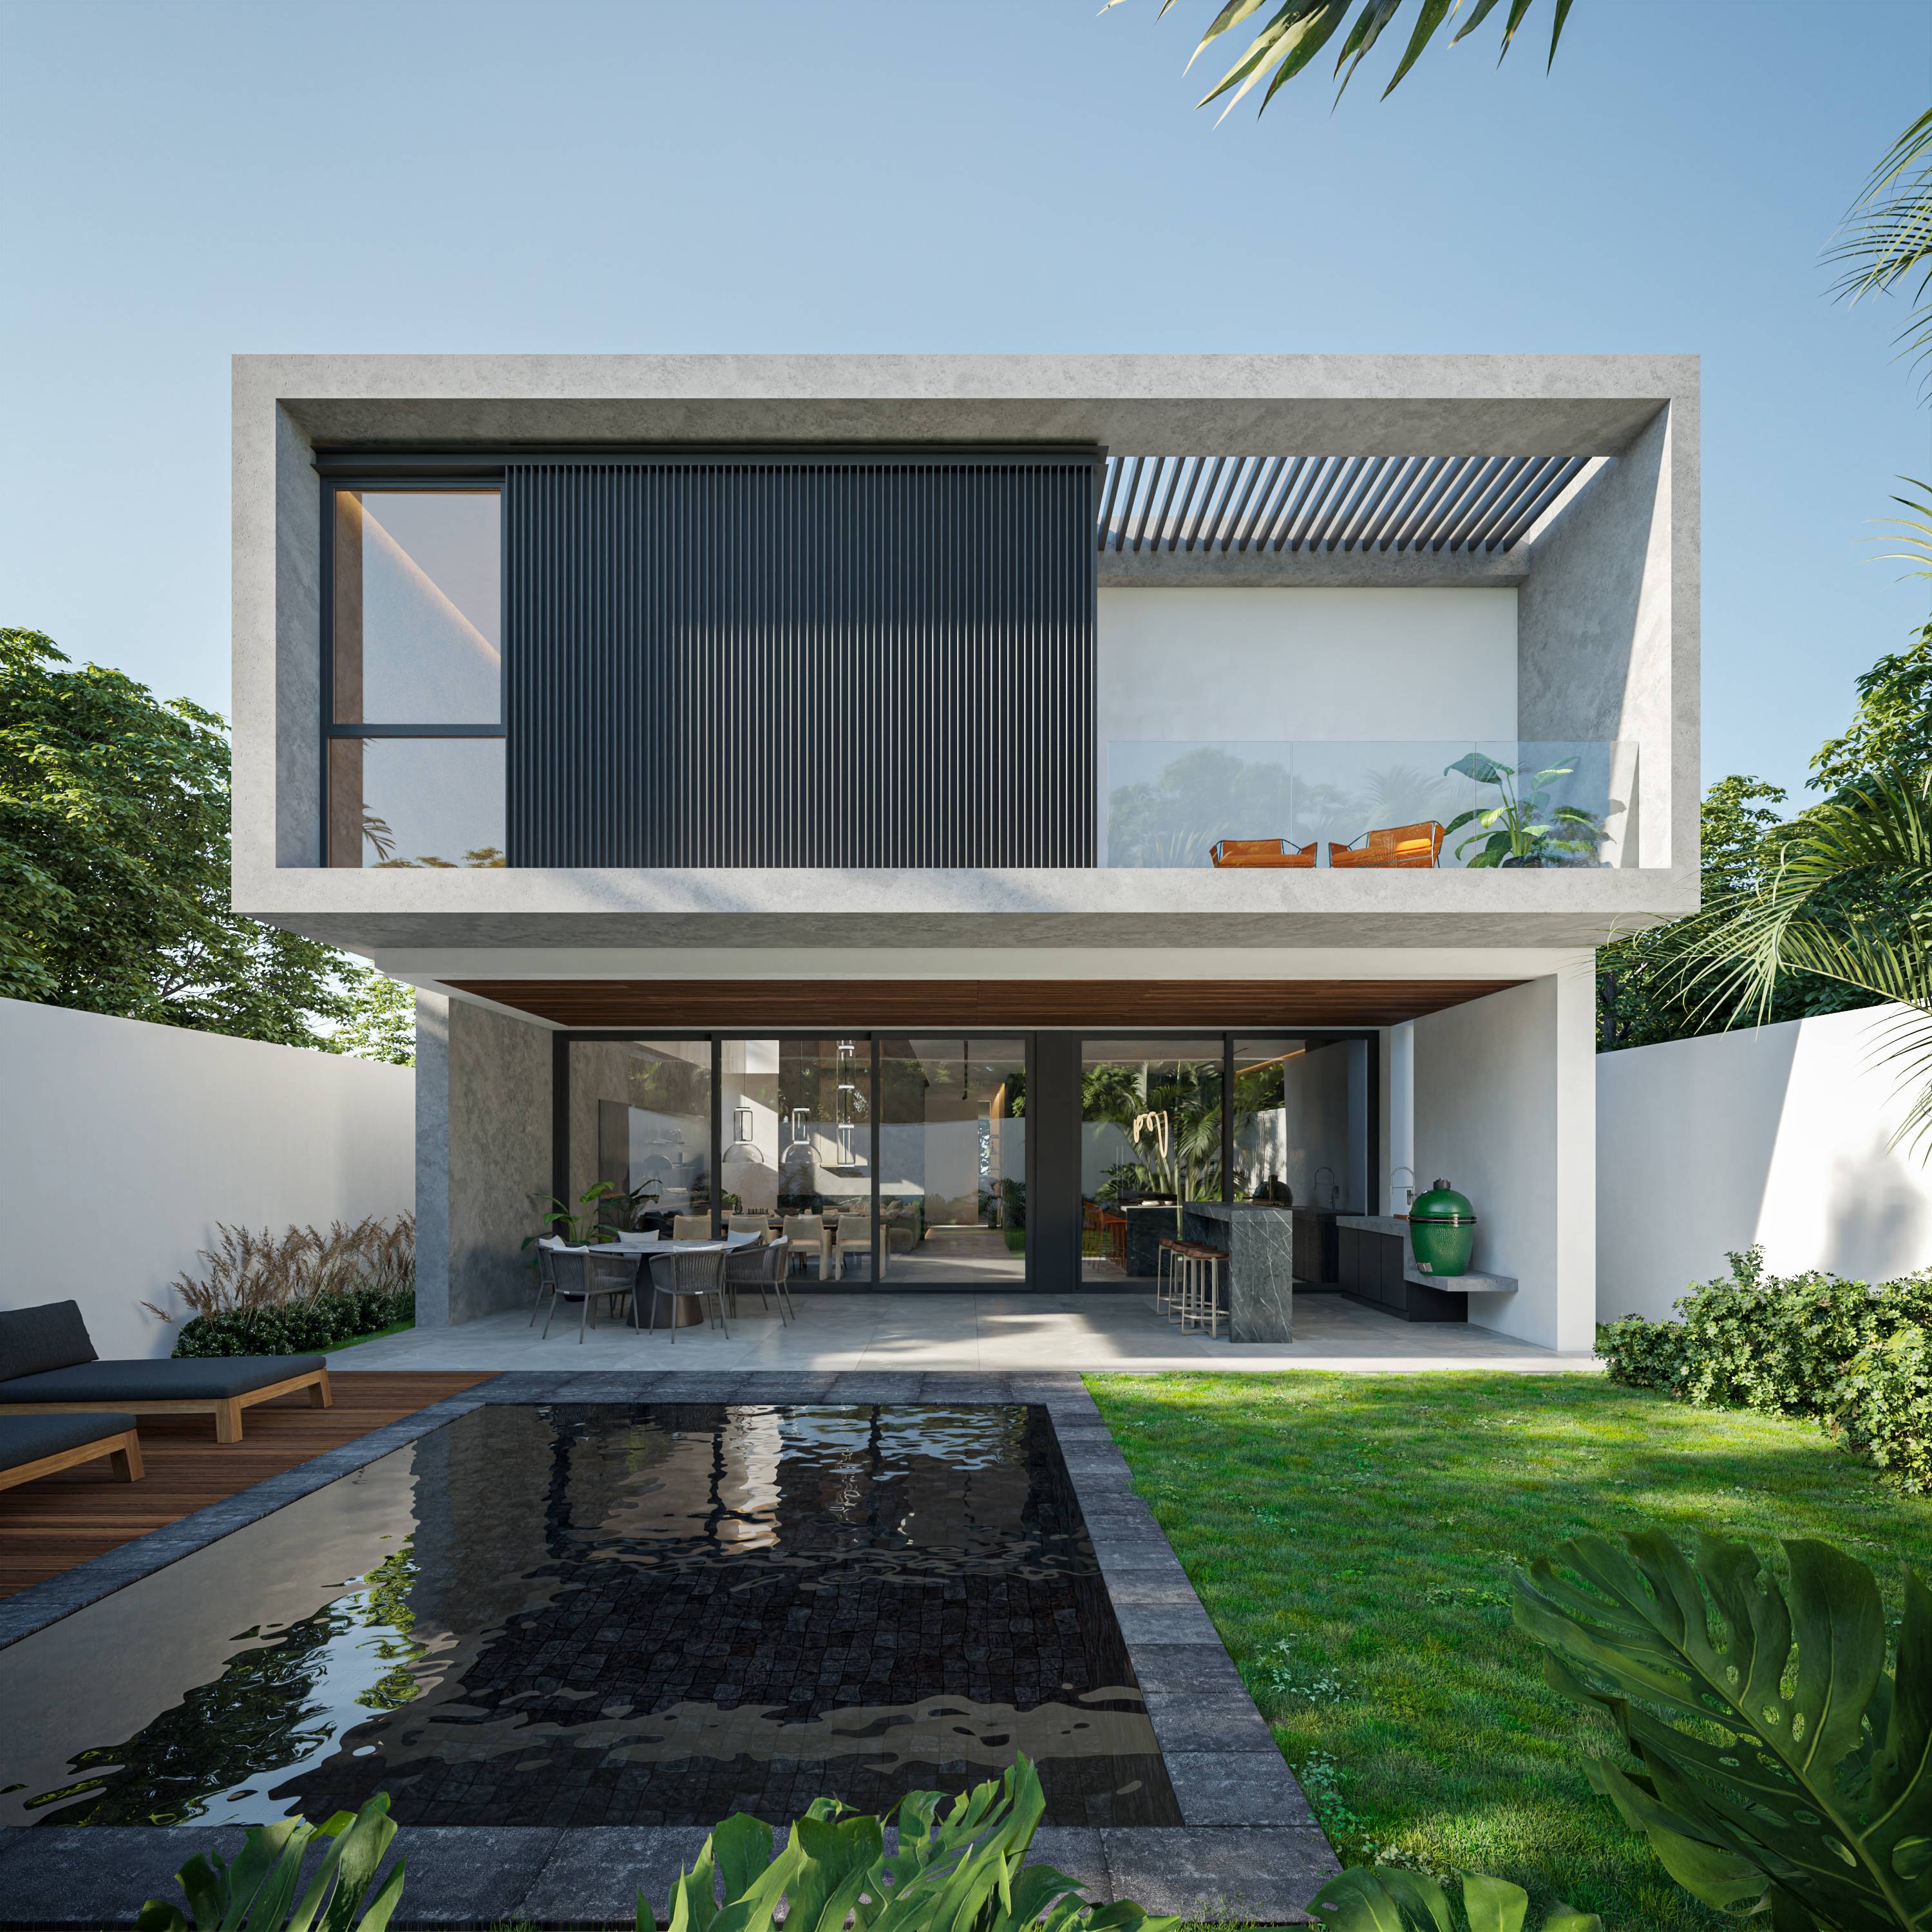 Exclusive Residential Opportunity at Provincia, Merida.